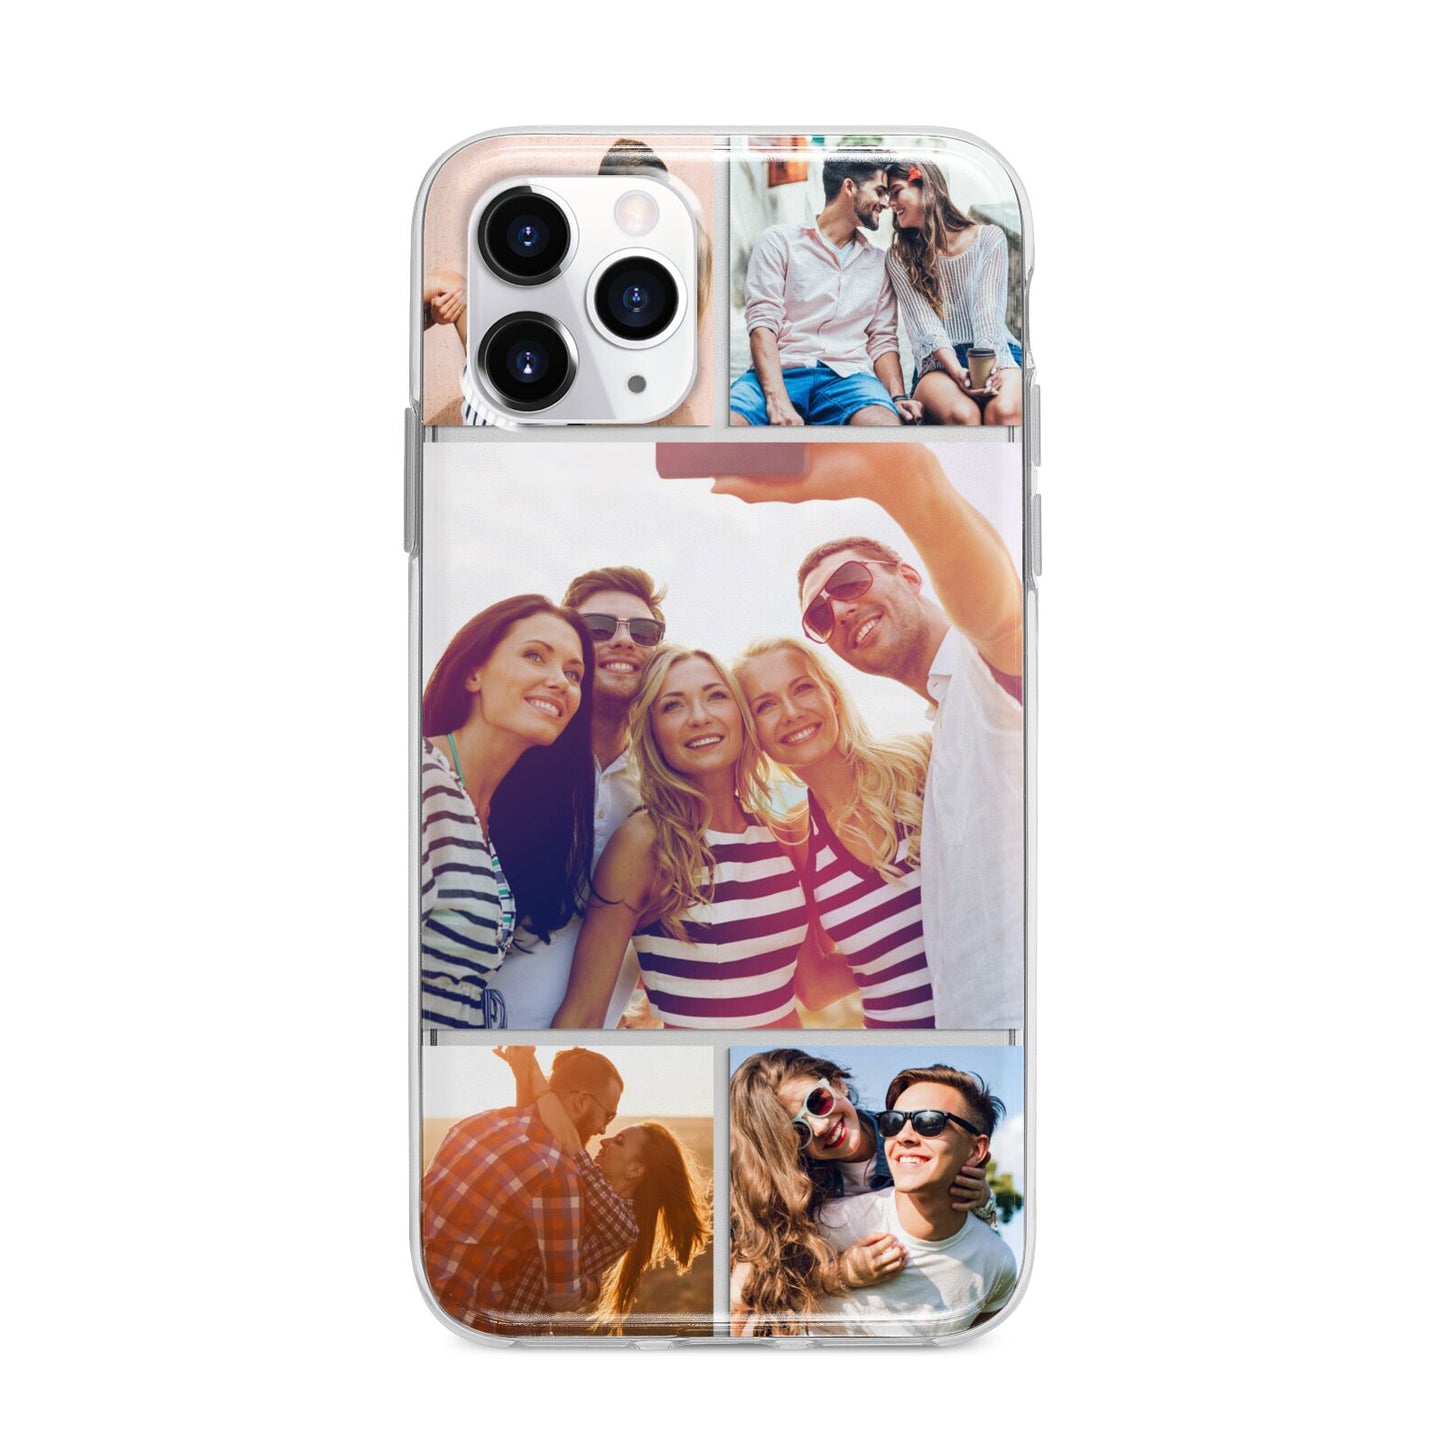 Tile Photo Collage Upload Apple iPhone 11 Pro Max in Silver with Bumper Case